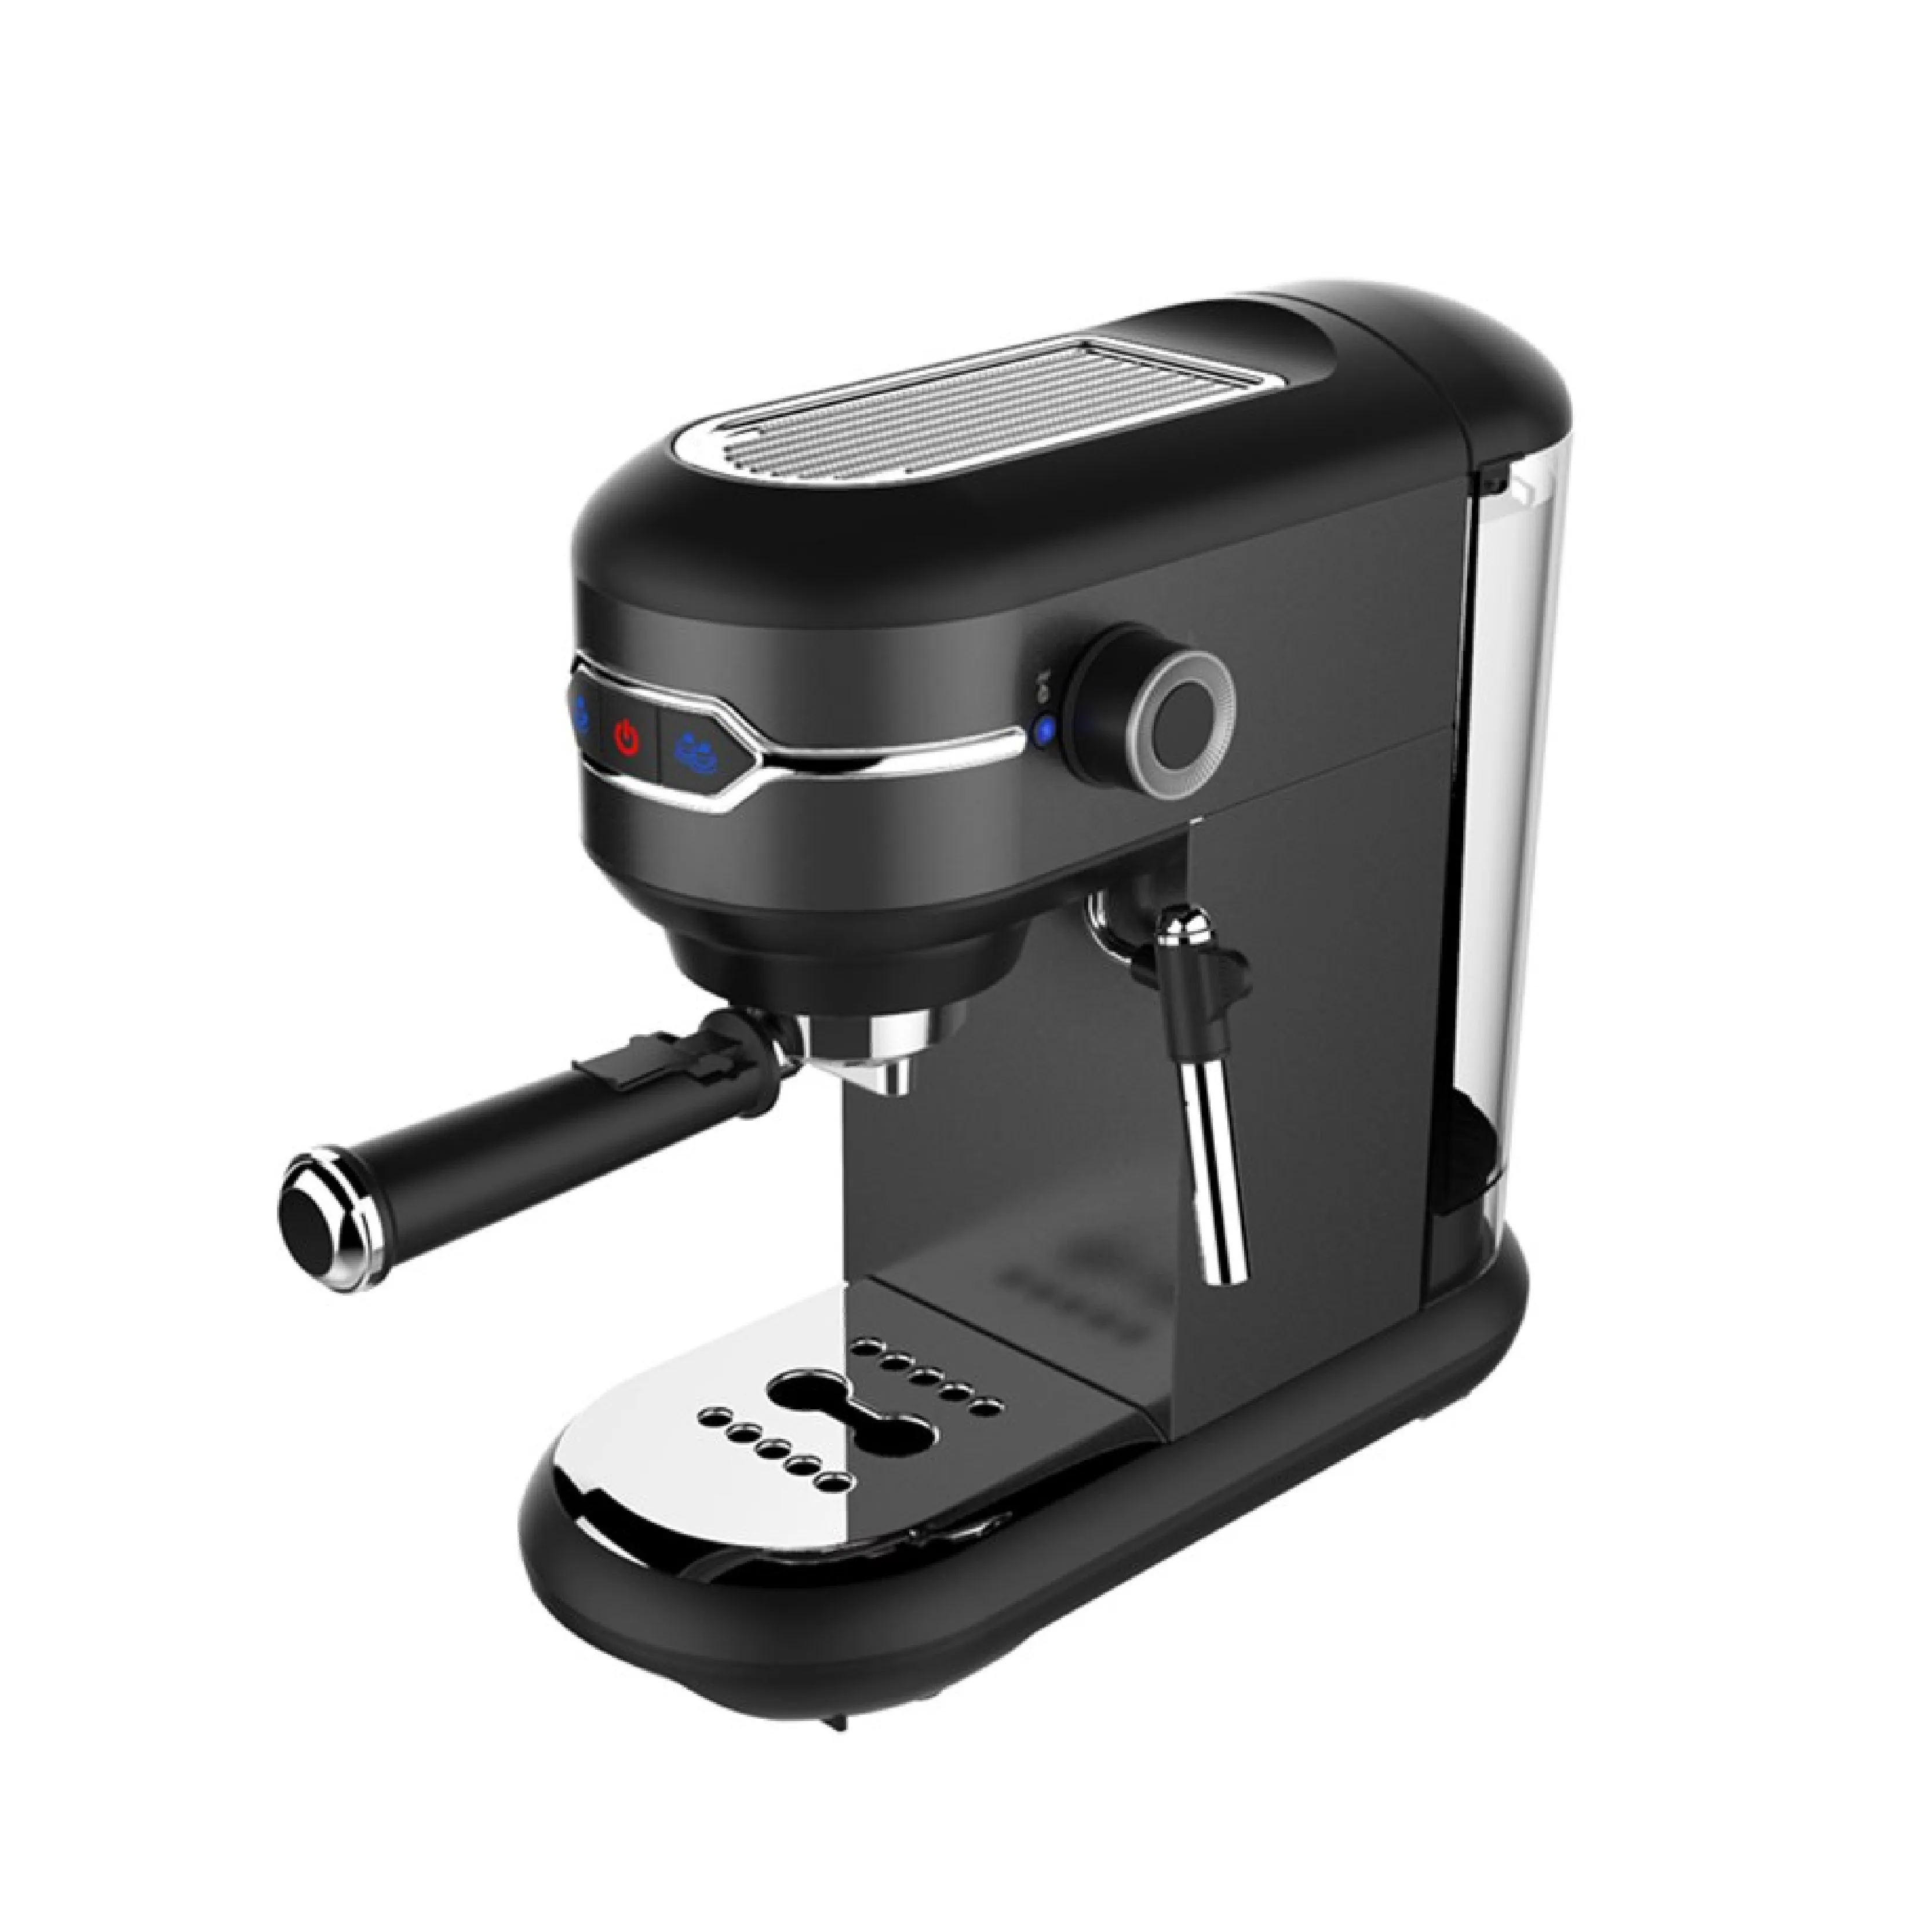 https://ae01.alicdn.com/kf/S4148b8565b9b4d08848b61e871447b60K/Wholesale-Programmable-Automatic-19-Bar-Pump-Capsule-Or-Powder-Espresso-Coffee-Machine-with-Milk-Frother.jpg